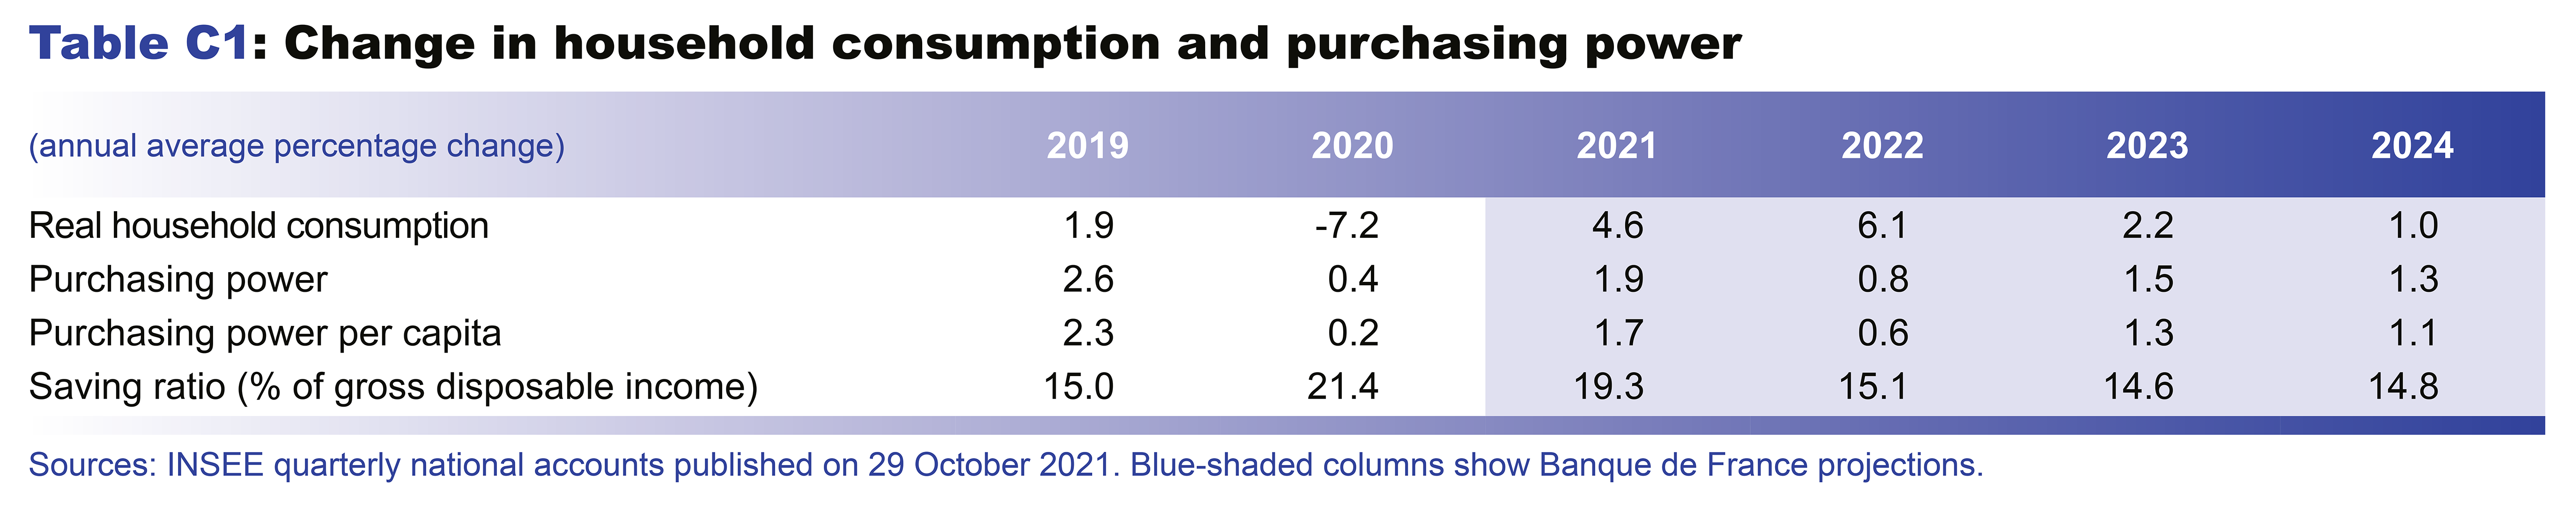 Macroeconomic projections – December 2021 - Change in household consumption and purchasing power